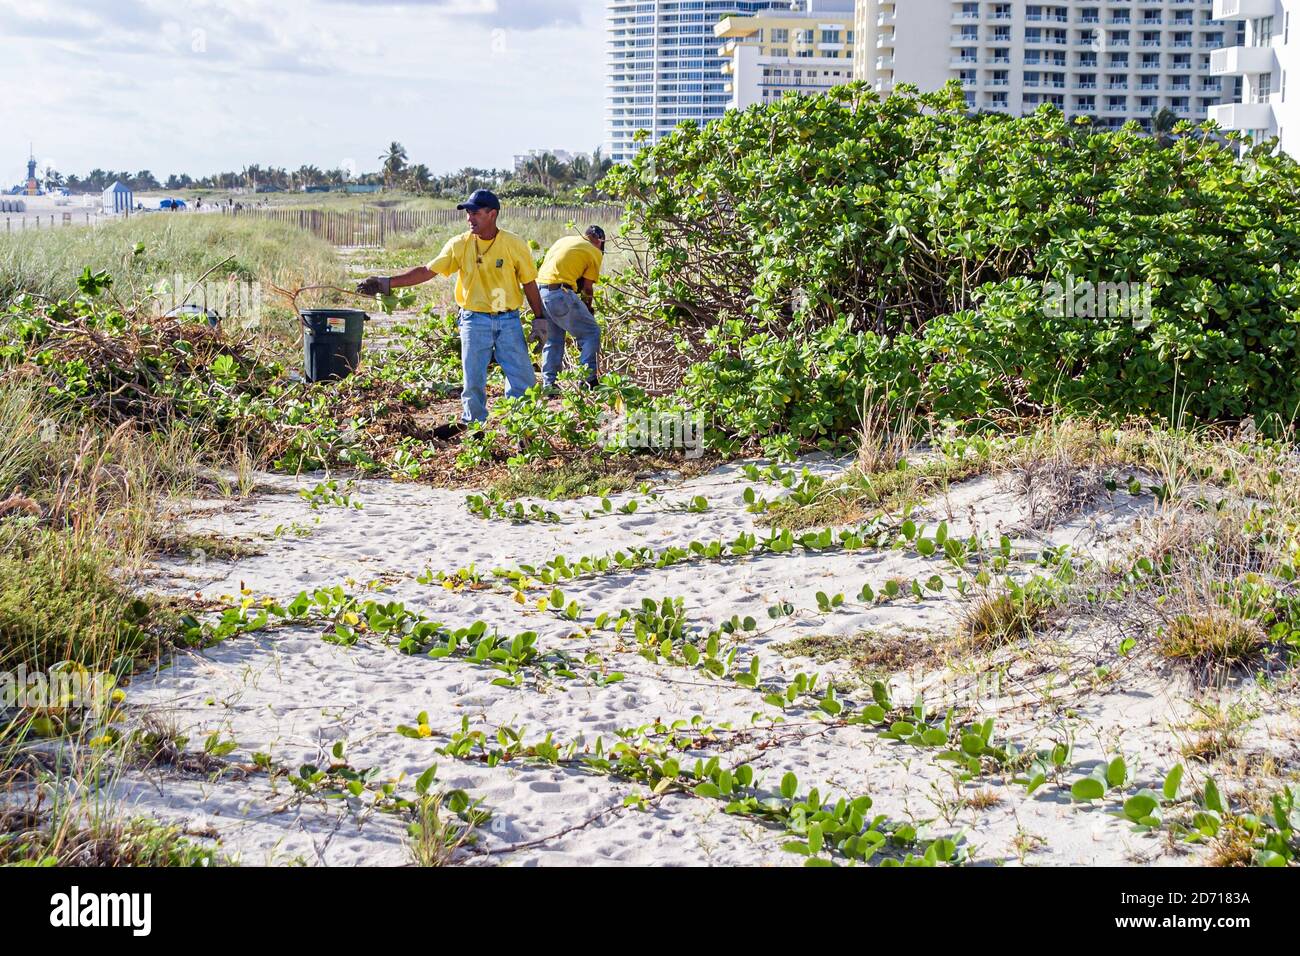 Miami Beach Florida,city worker workers,remove removing non-native invasive vegetation plants protected dunes, Stock Photo